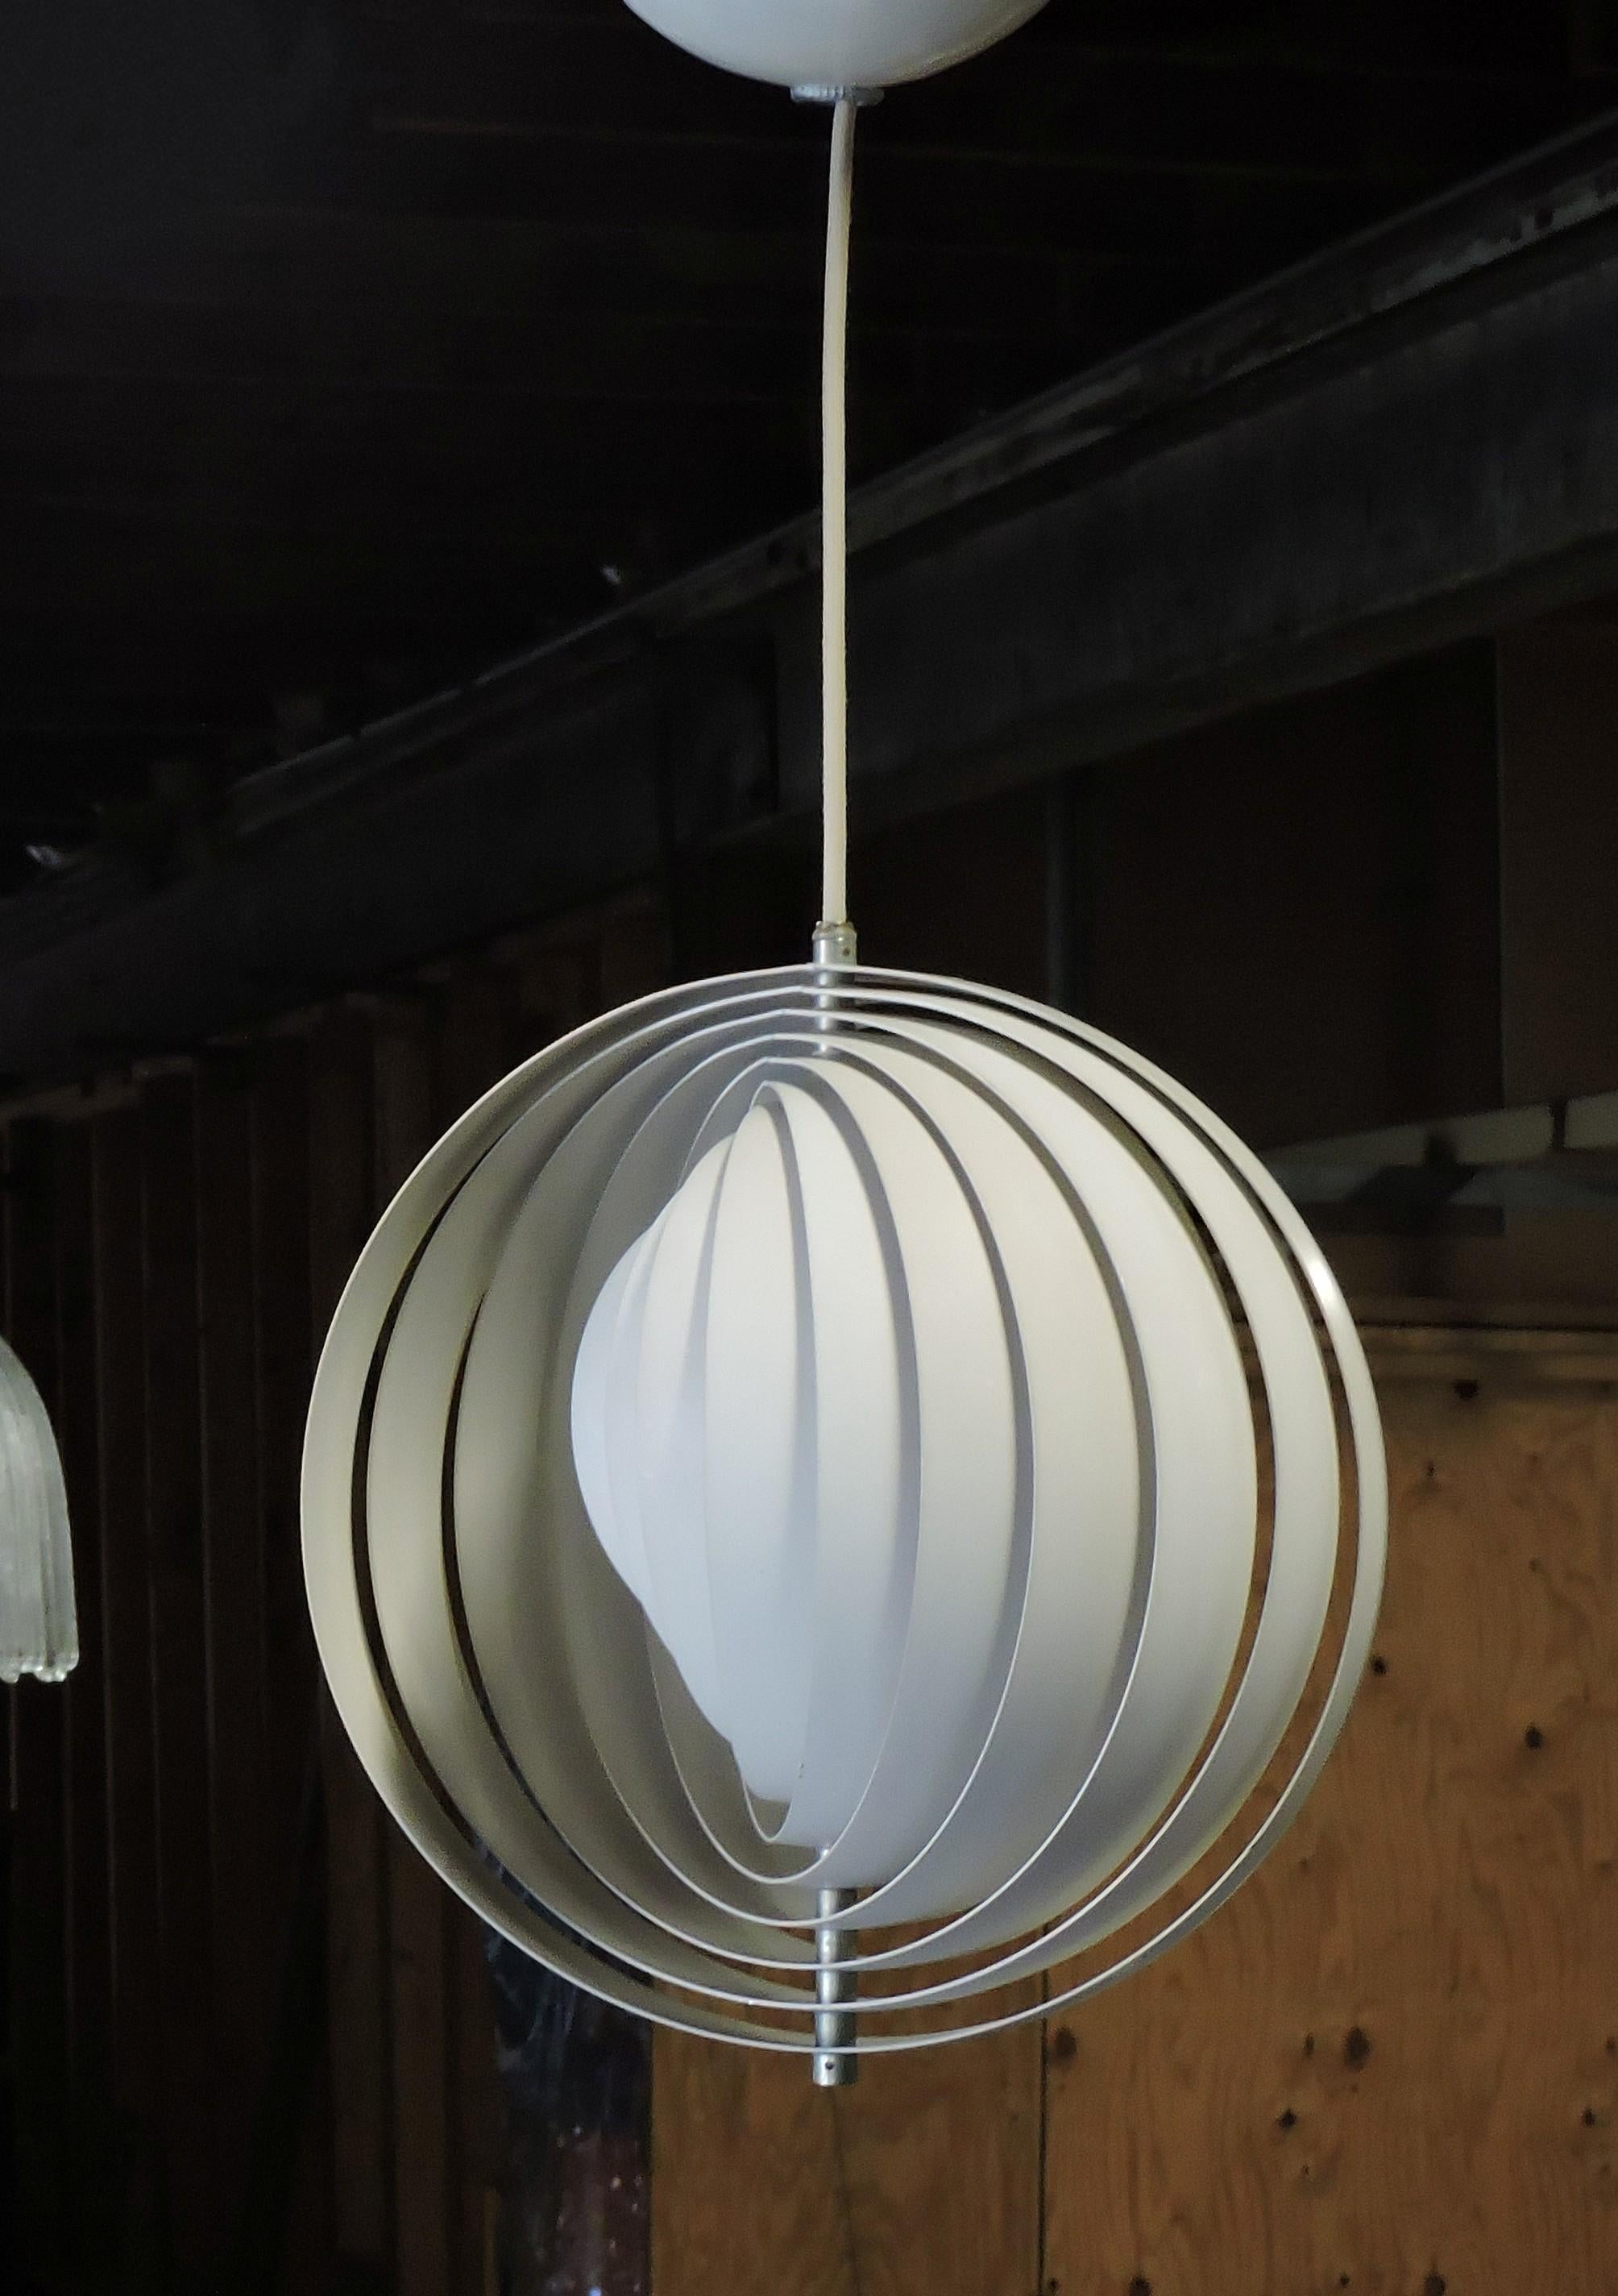 Original moon pendant lamp designed by Verner Panton and made in Denmark by Louis Poulsen. A beautiful early design by Verner Panton, this lamp has ten adjustable rings which artfully diffuse the light. It has all new wiring and the original Louis